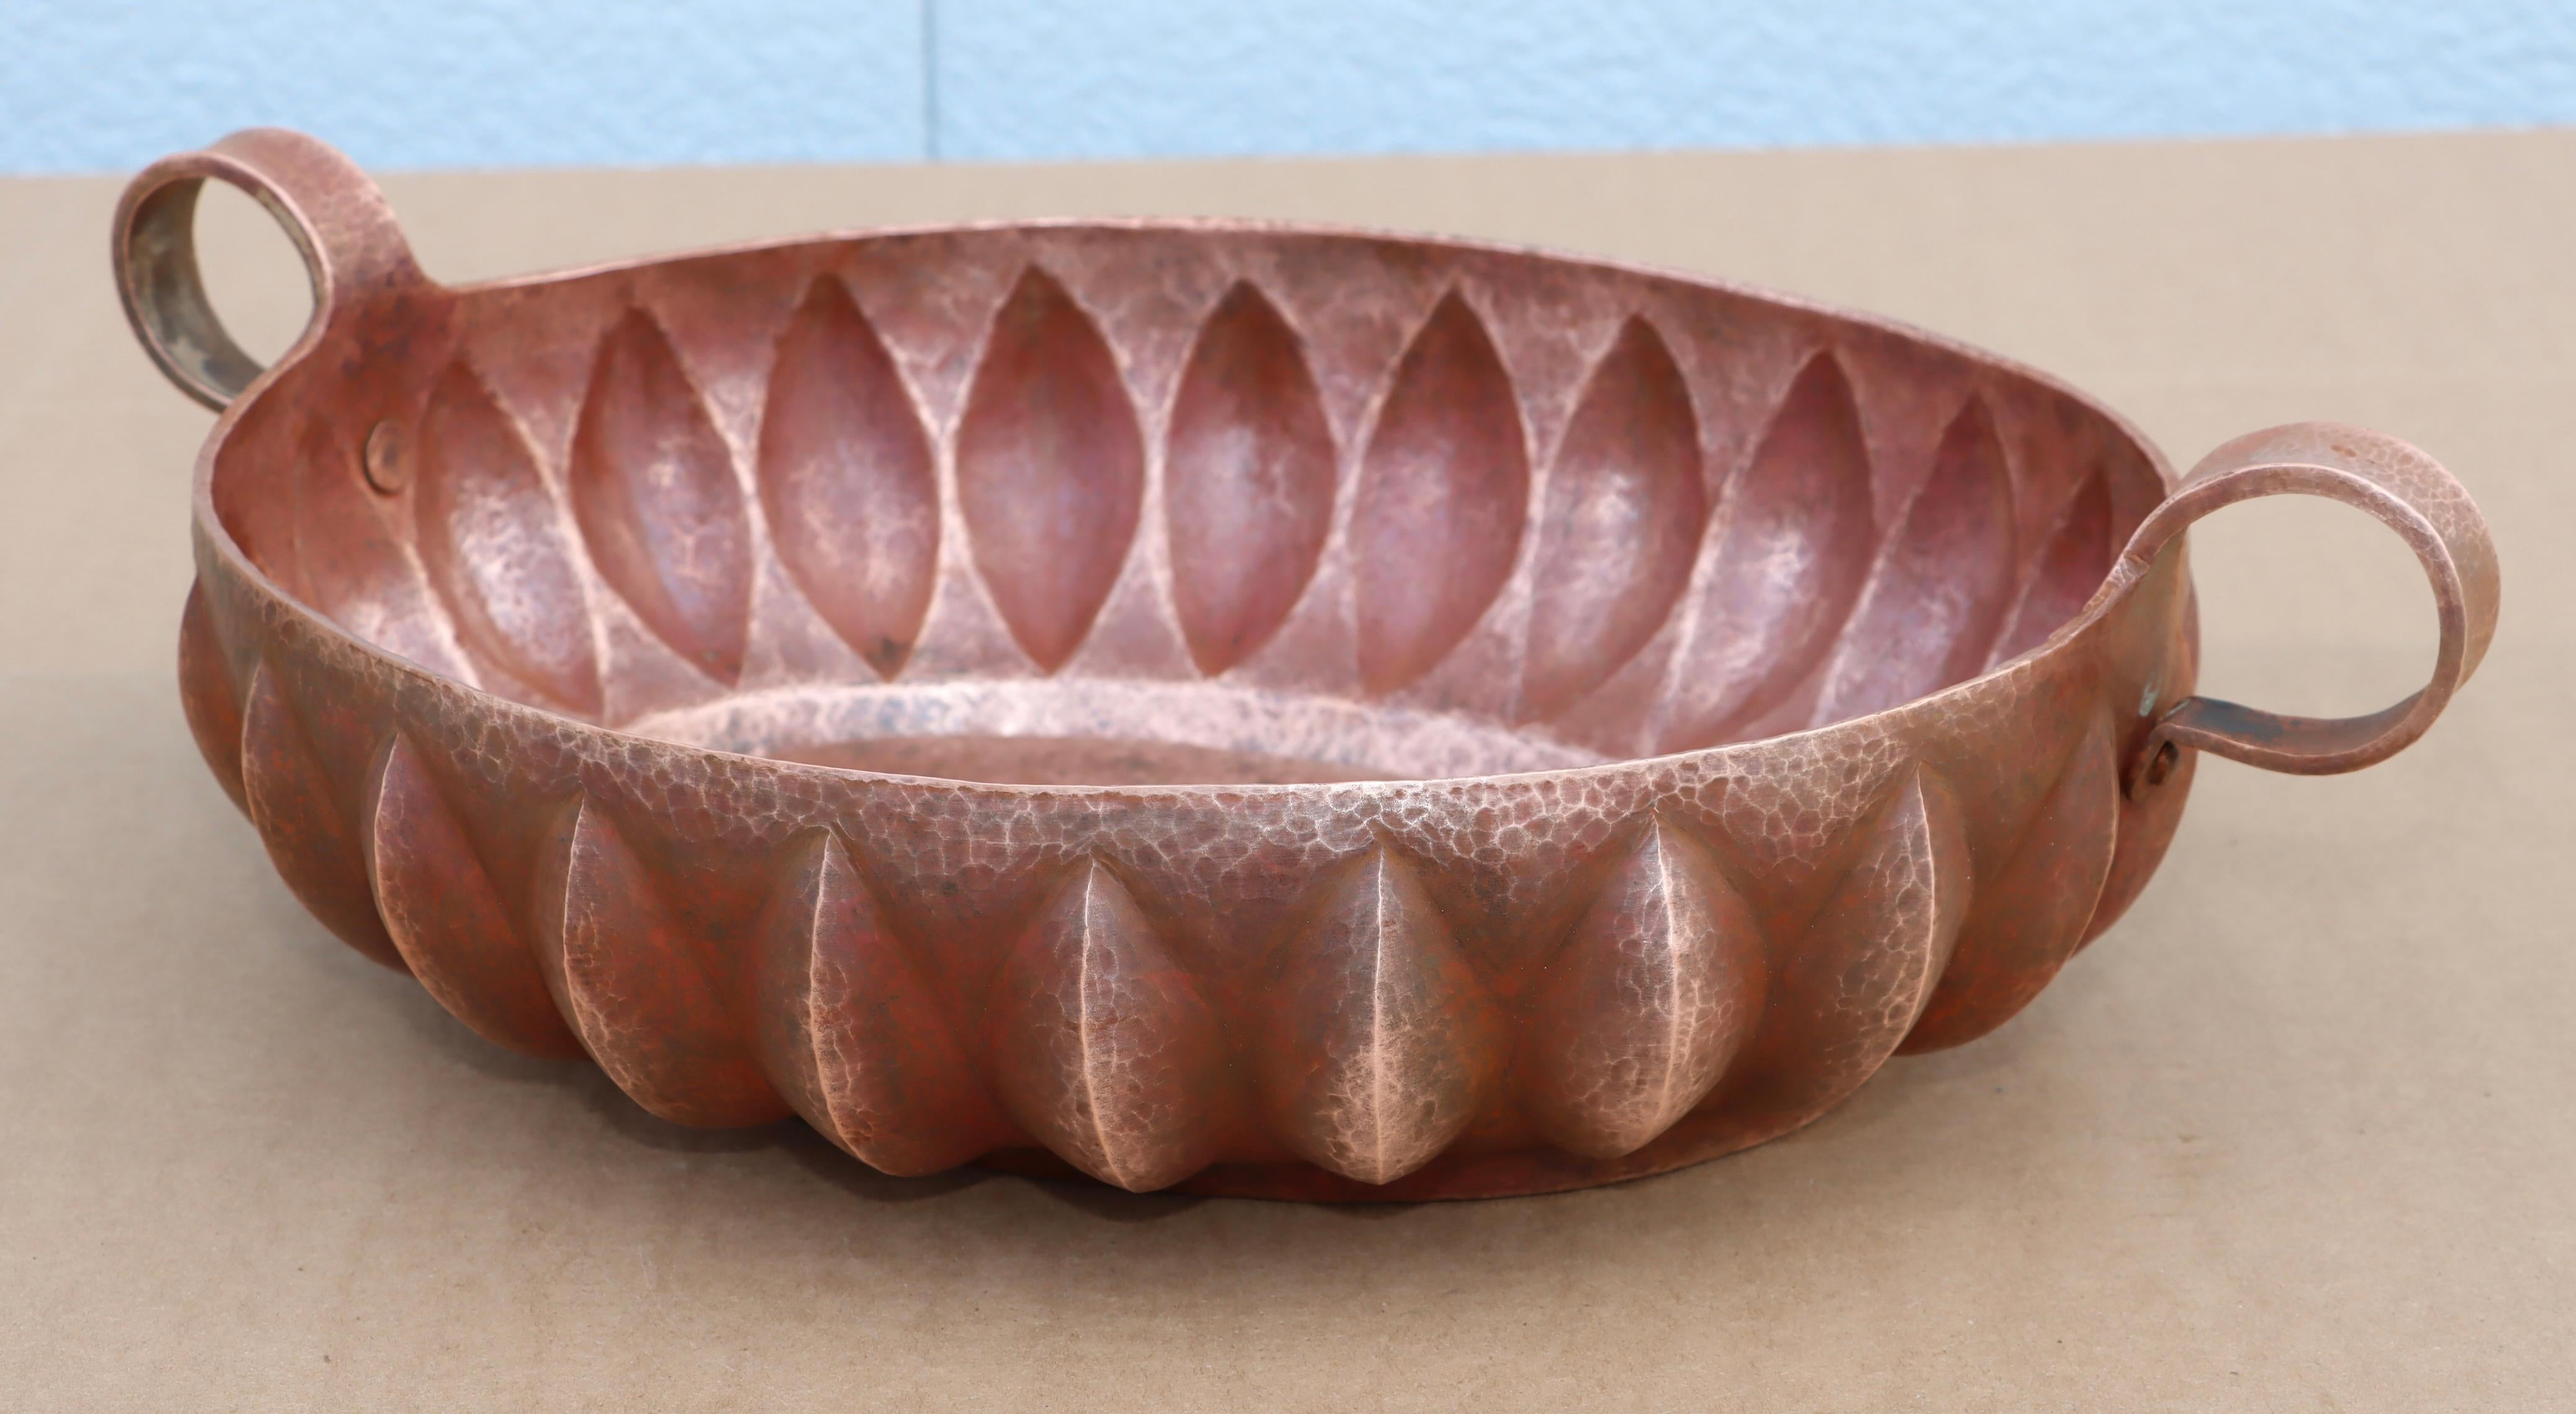 1960's modern hand hammered copper bowl from Mexico, well made and heavy signed by the artist, in vintage condition lightly hand polished with some wear and patina due to age and use.